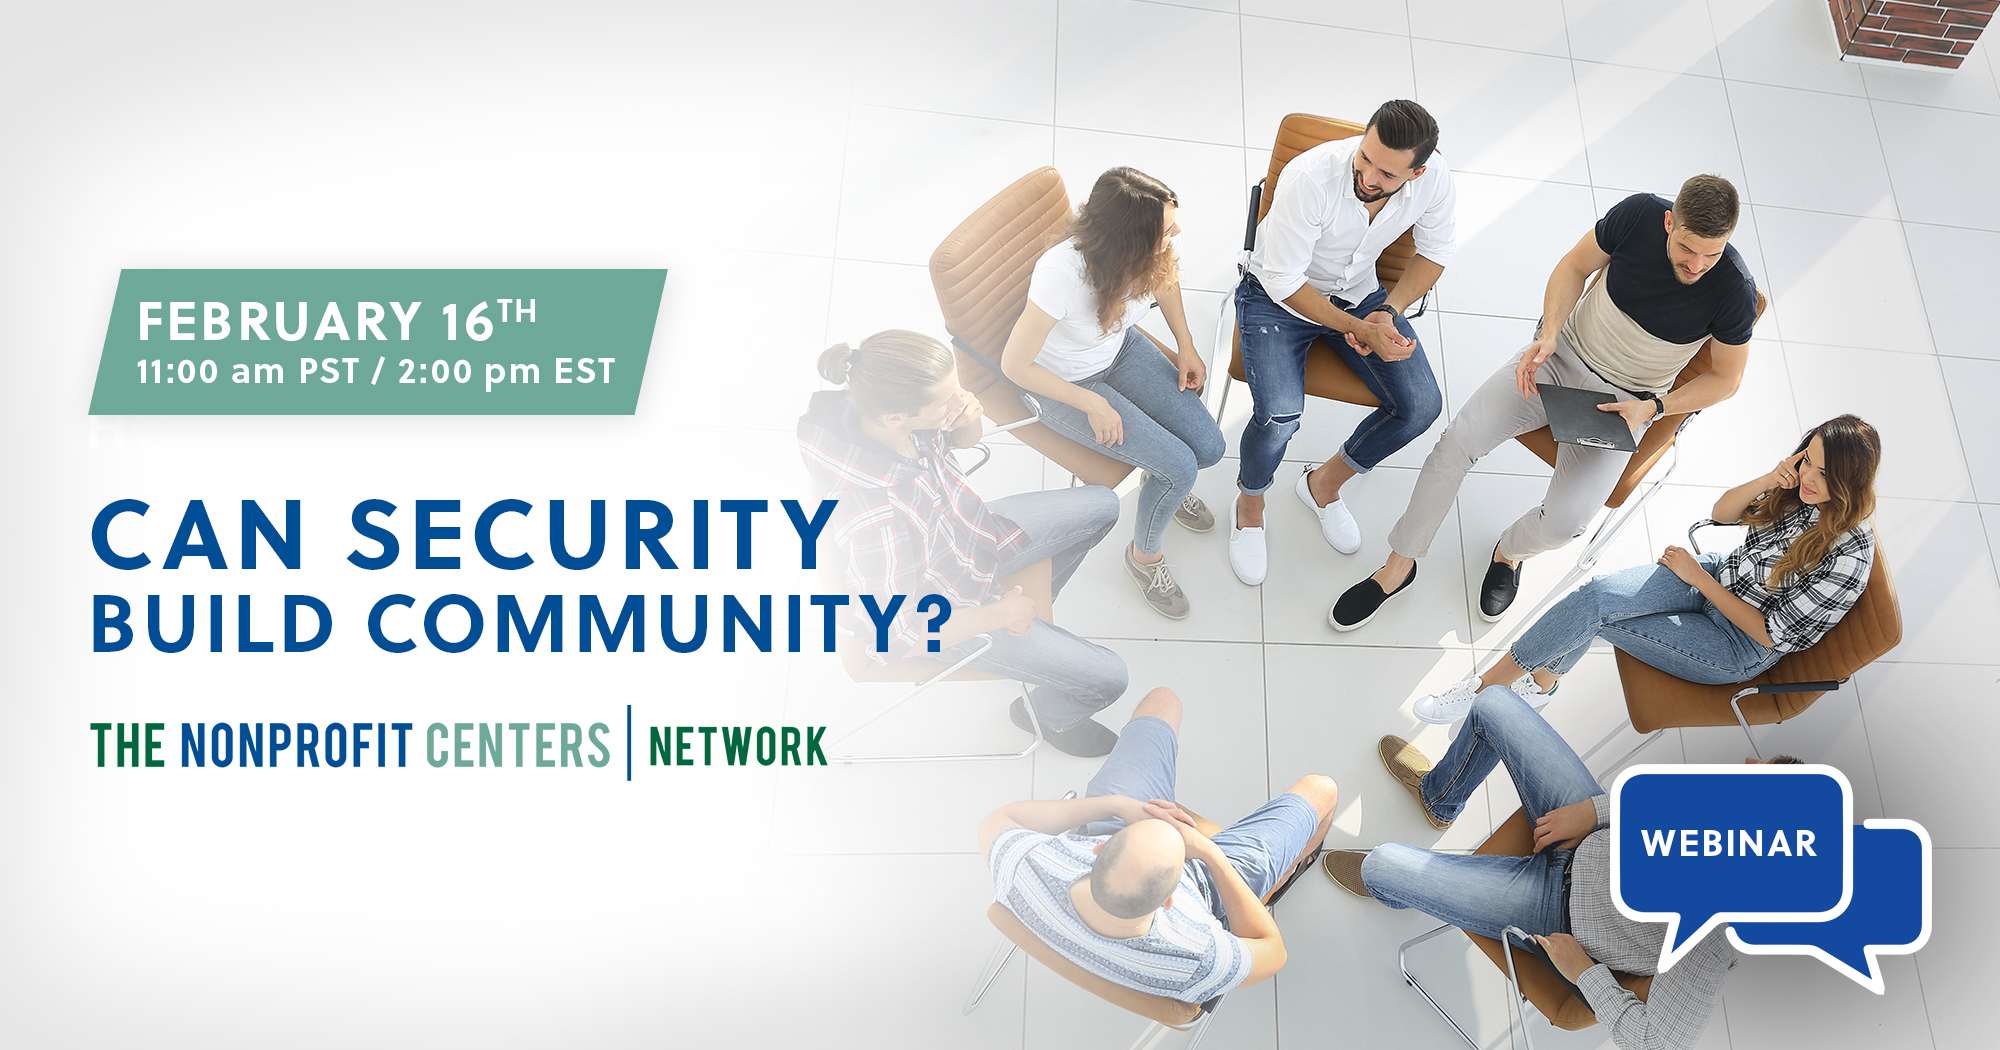 Can Security Build Community?